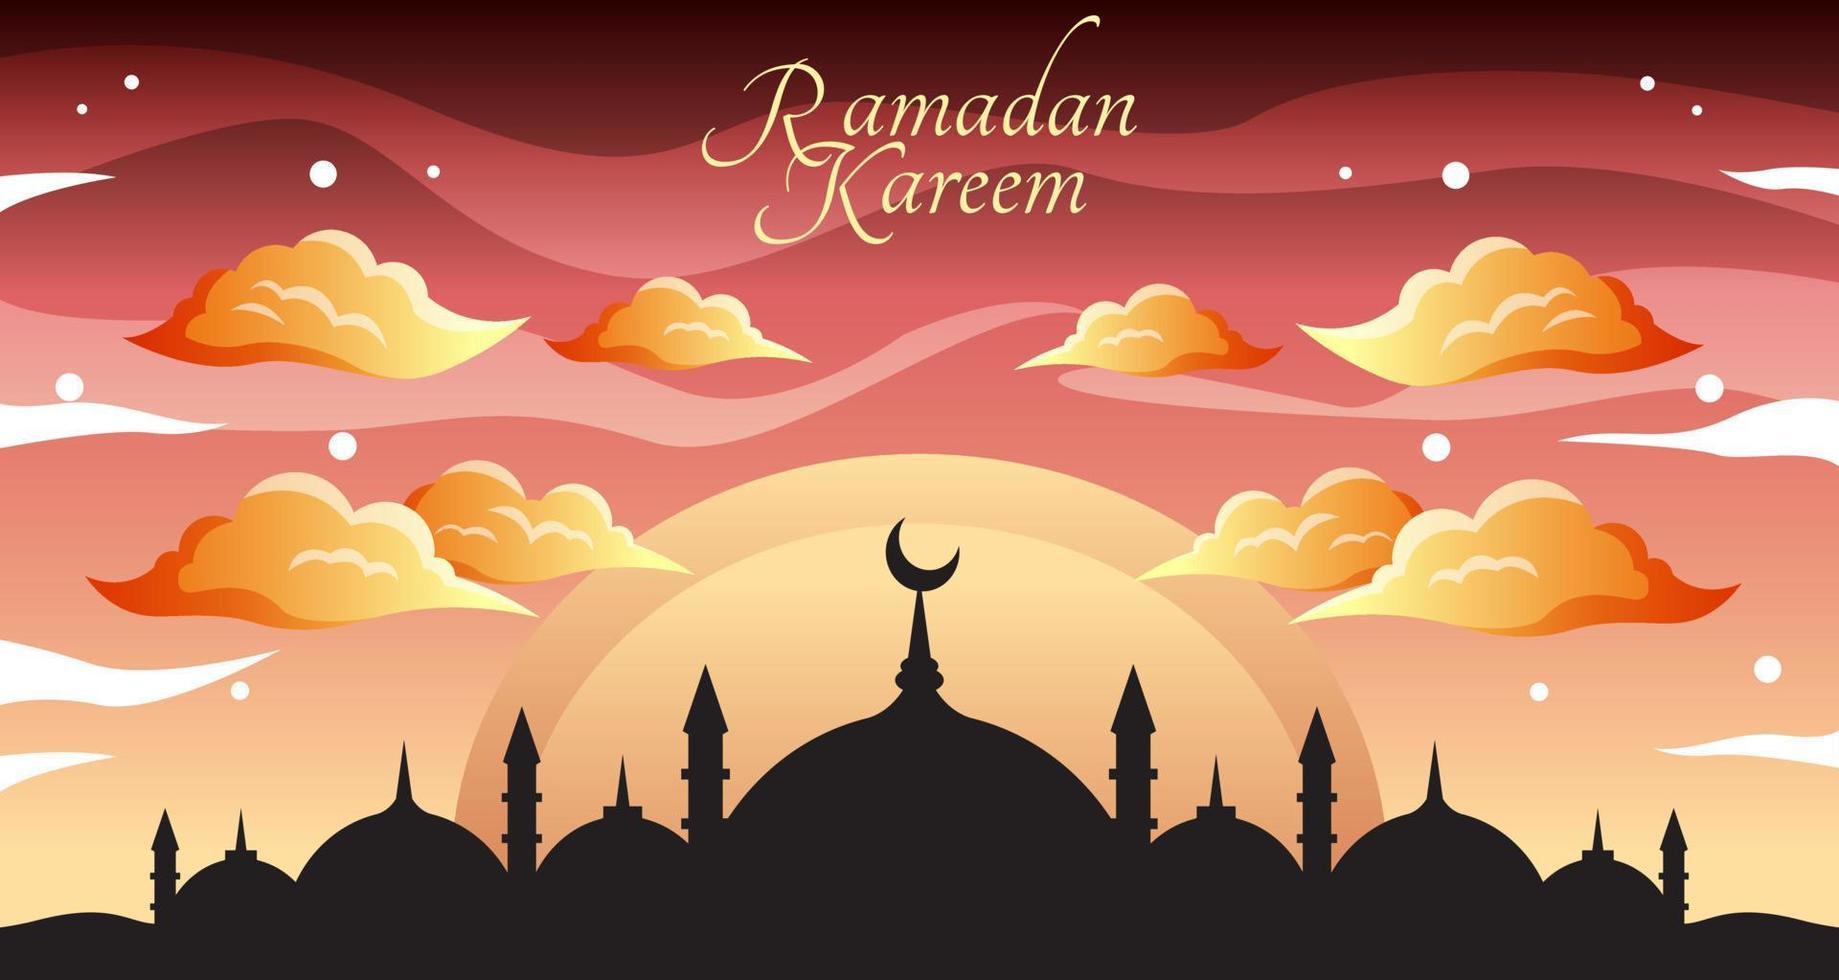 Poster Design Beautiful Sky View With Many Stars And Clouds On The Night Of Ramadan Kareem Time For Sahur Happy Fasting For Every Muslim Free Vector